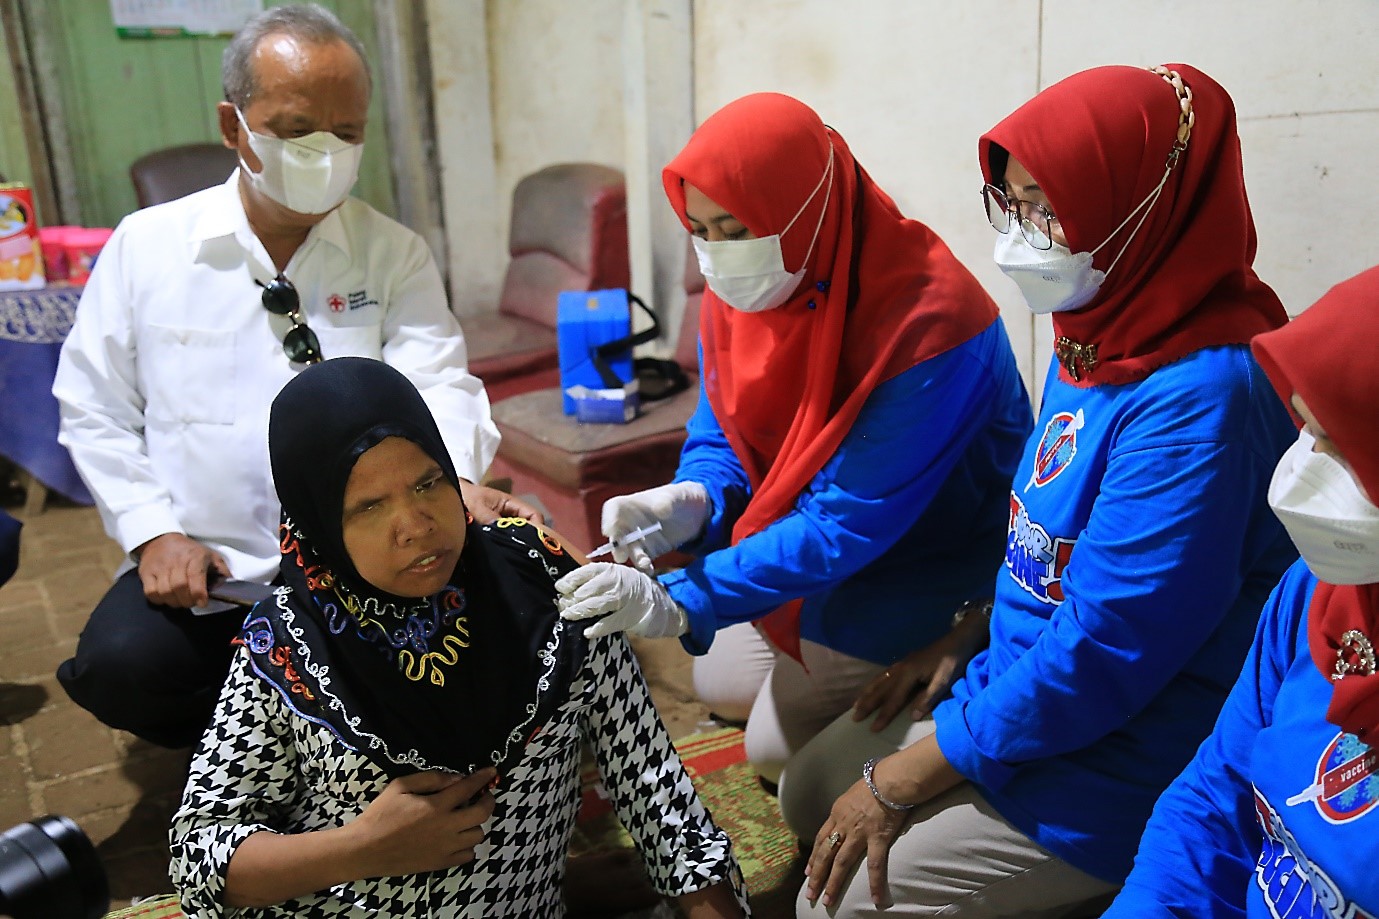 Health workers and the Head of the Tayu 2 Health Center, Imbang Tri Hanekowati, administer COVID-19 vaccination to Suyati at her home in Kedungbang Village, Central Java (photo by: AIHSP Documentation Team).